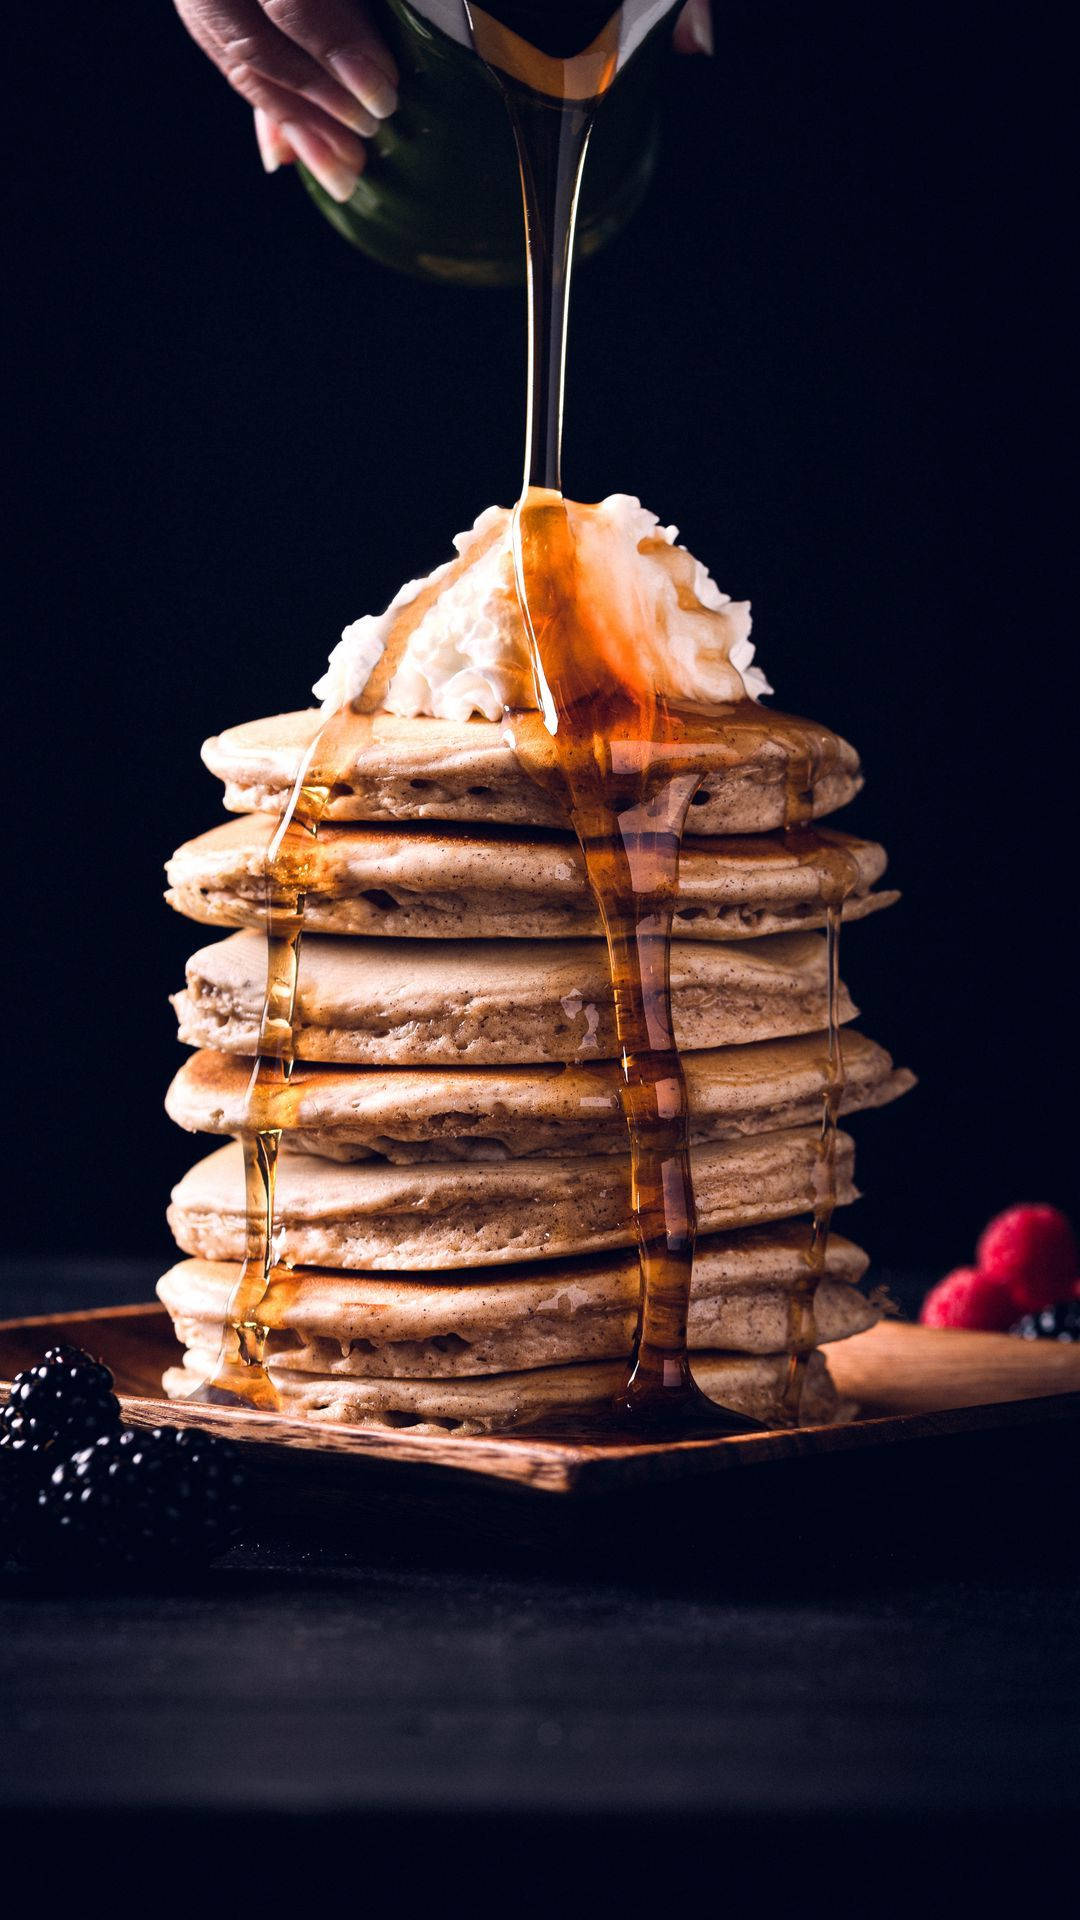 Pancakes With Whipped Cream